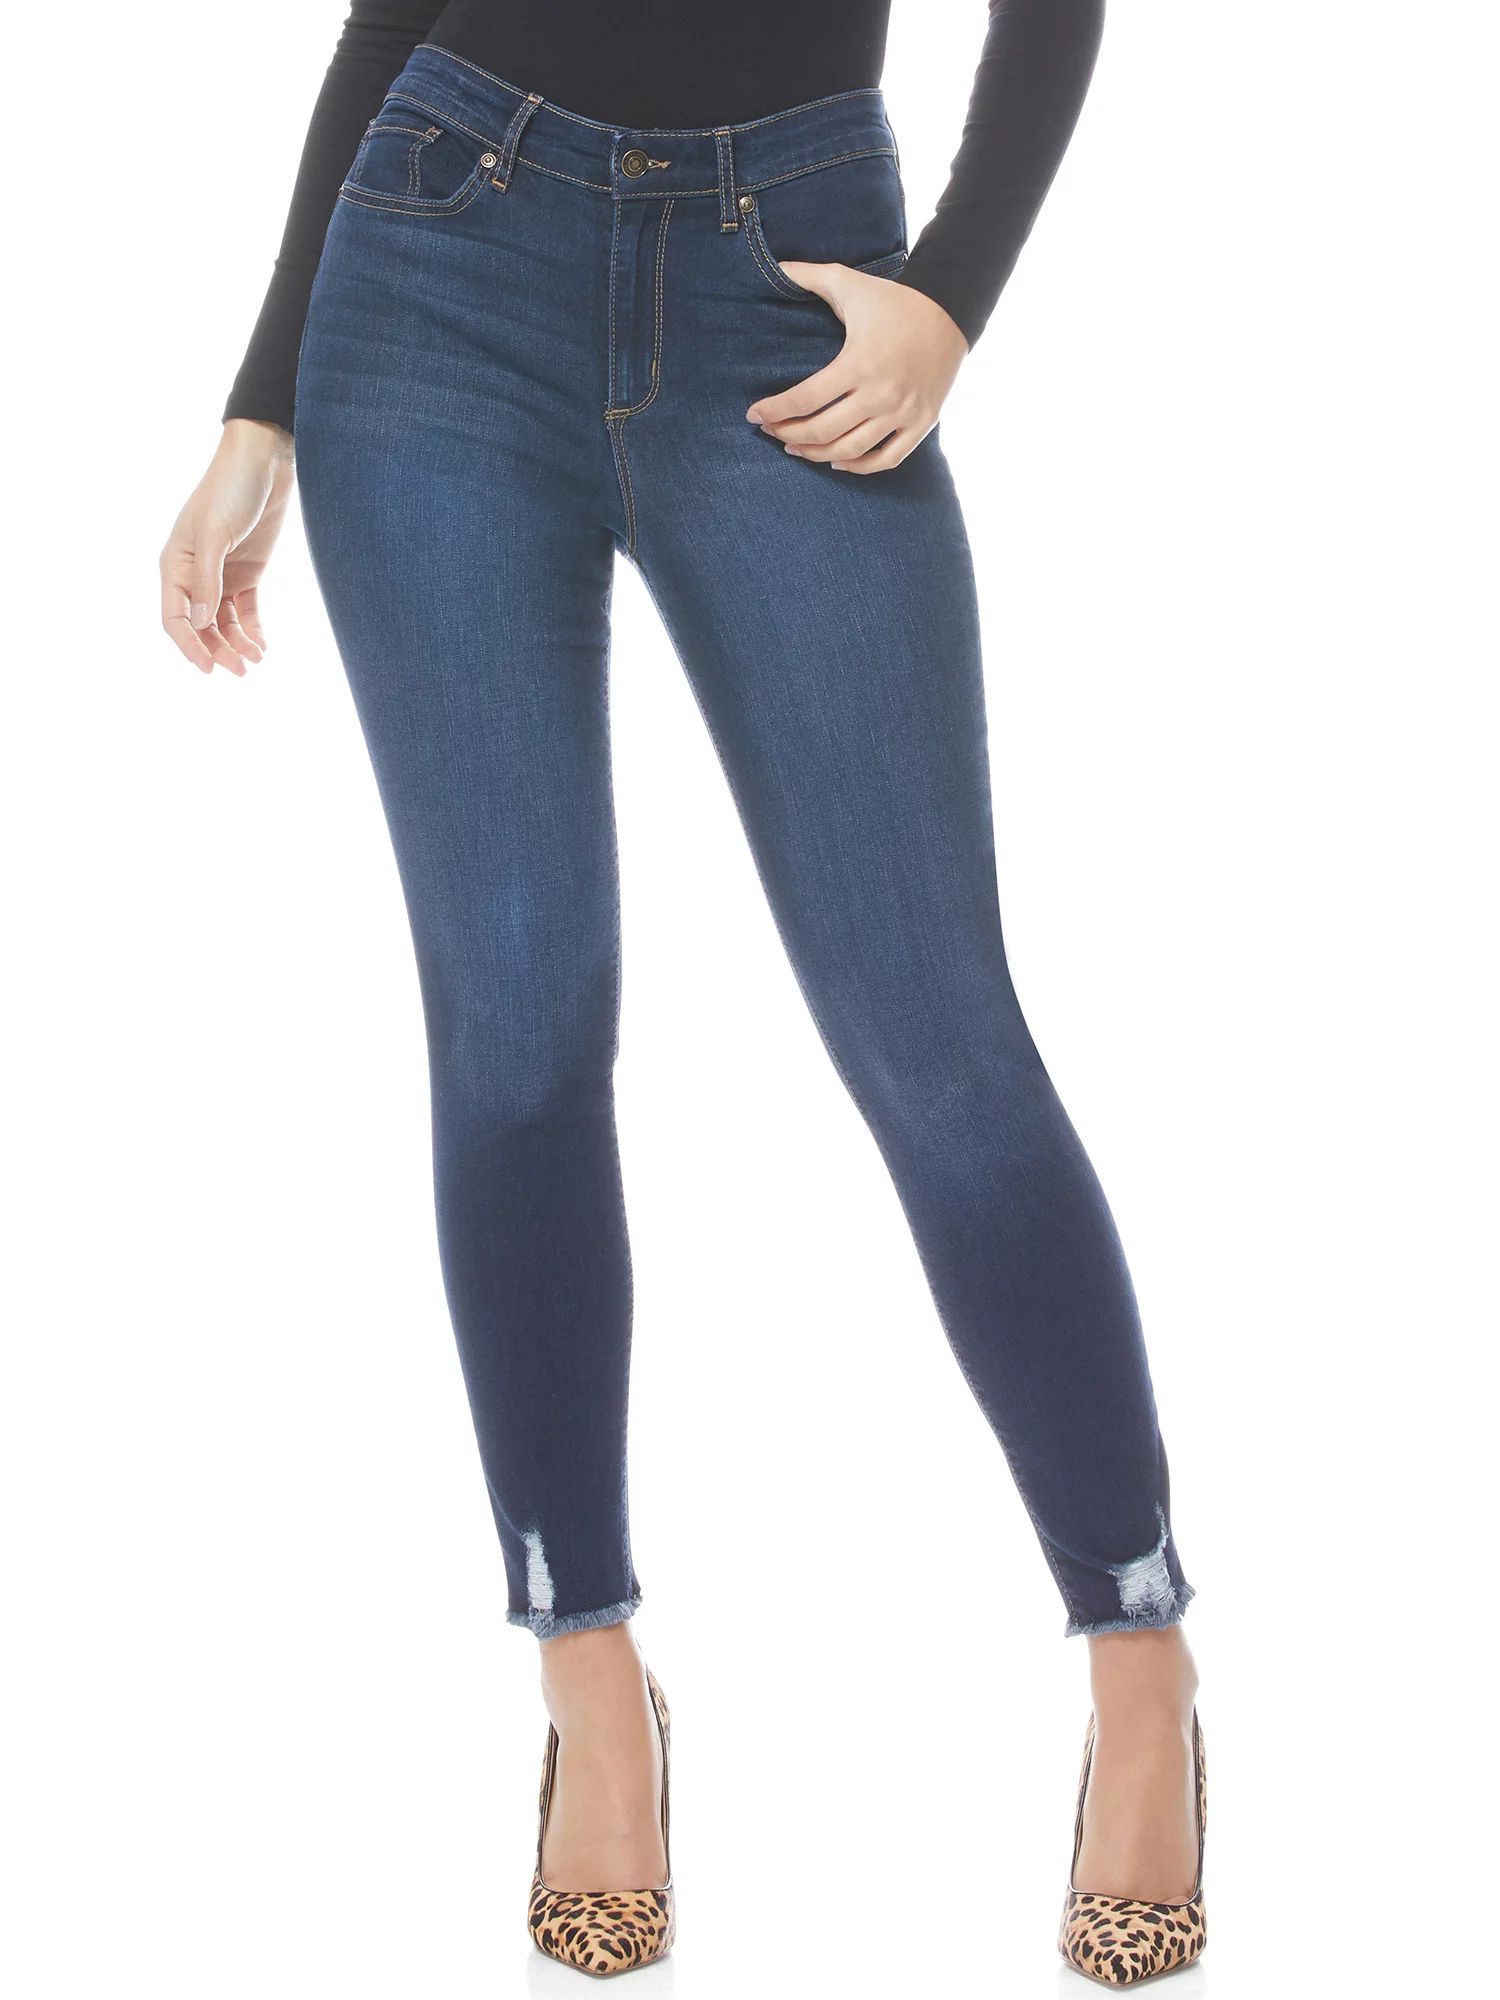 Sofia Jeans Women's Rosa Curvy High Rise Destructed Skinny Ankle Jeans | Walmart (US)